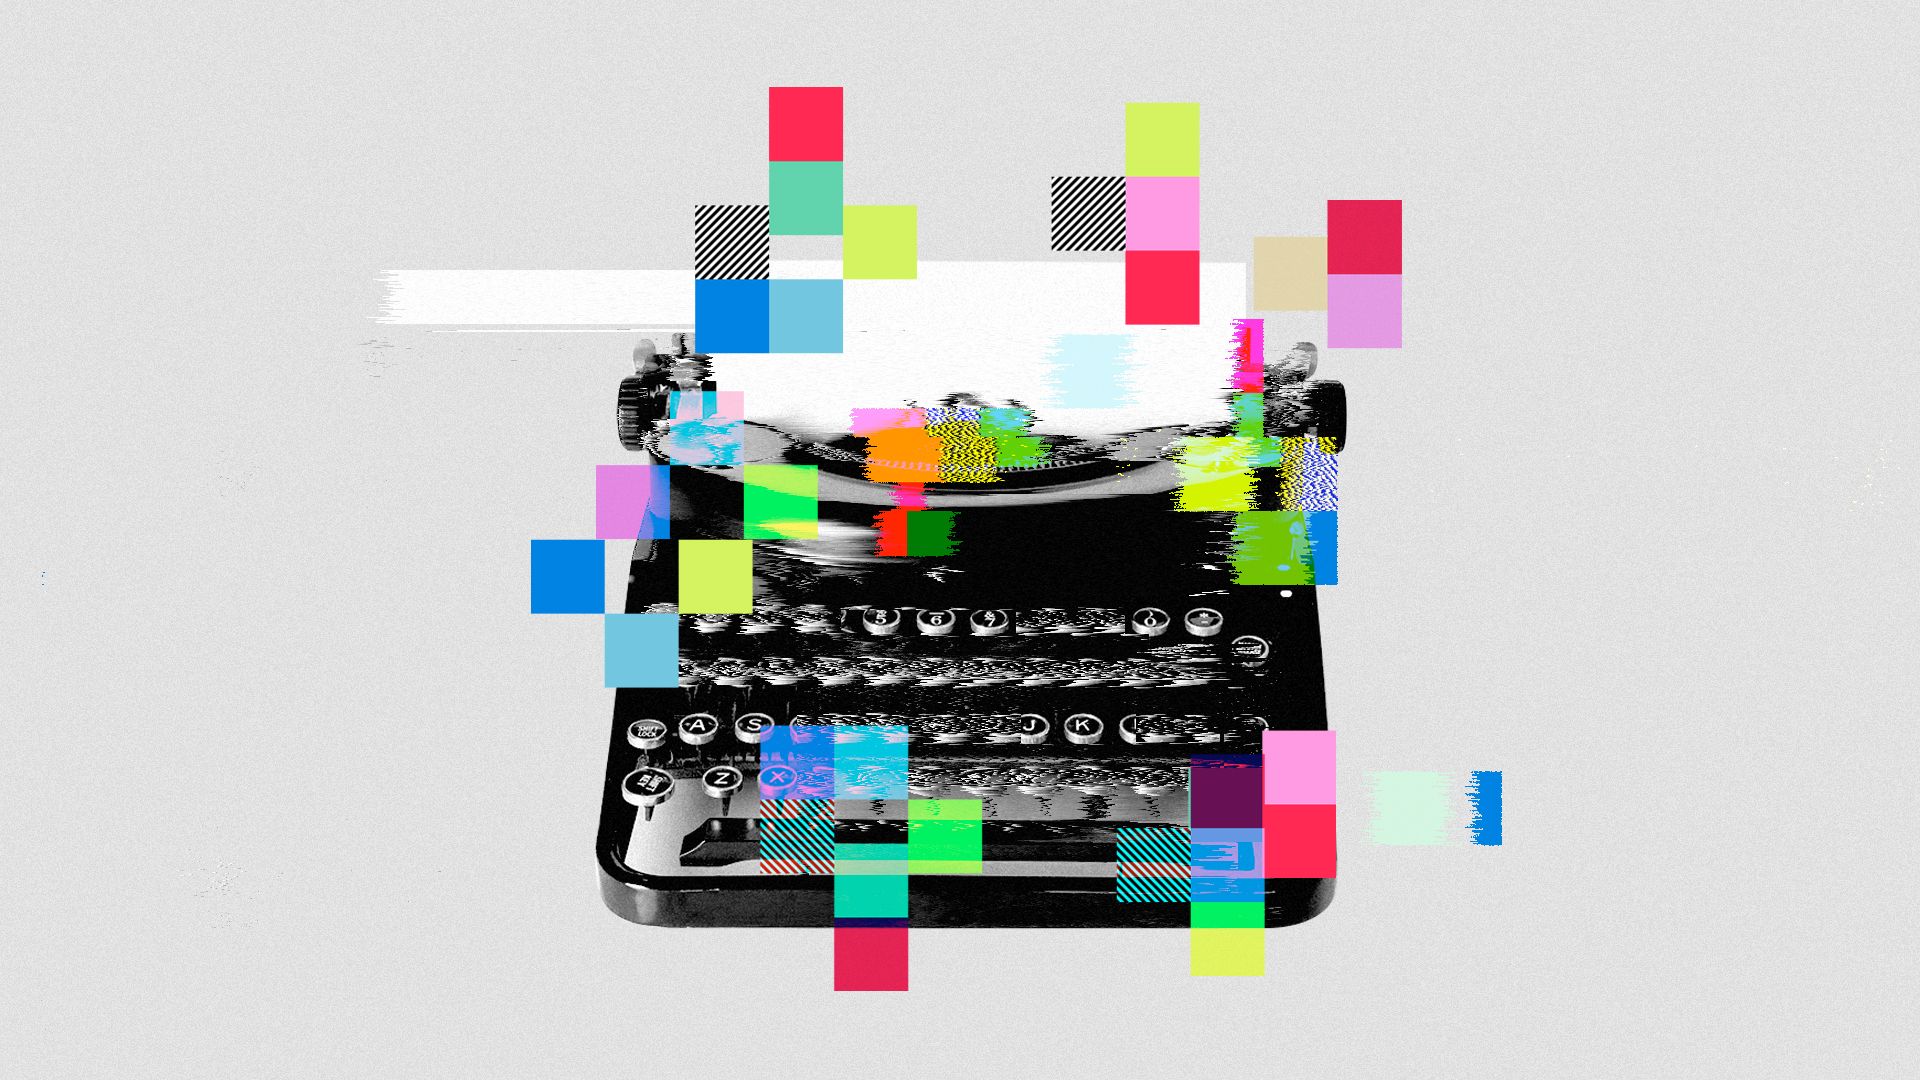 Illustration of a typewriter interrupted by cubes and glitches